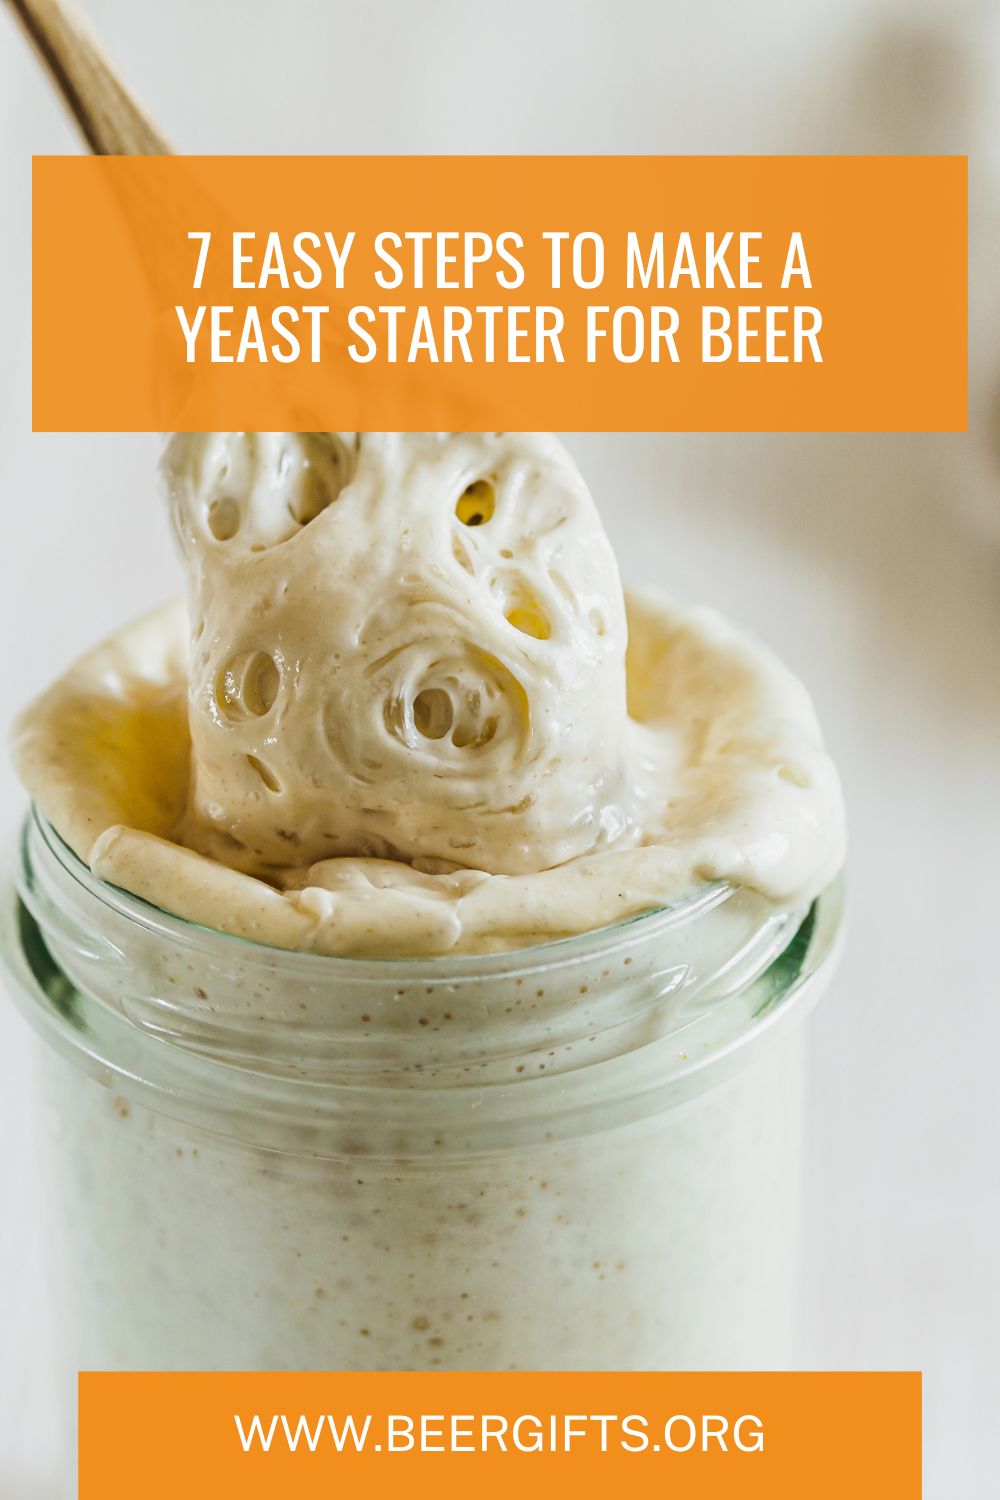 7 Easy Steps to Make a Yeast Starter for Beer9